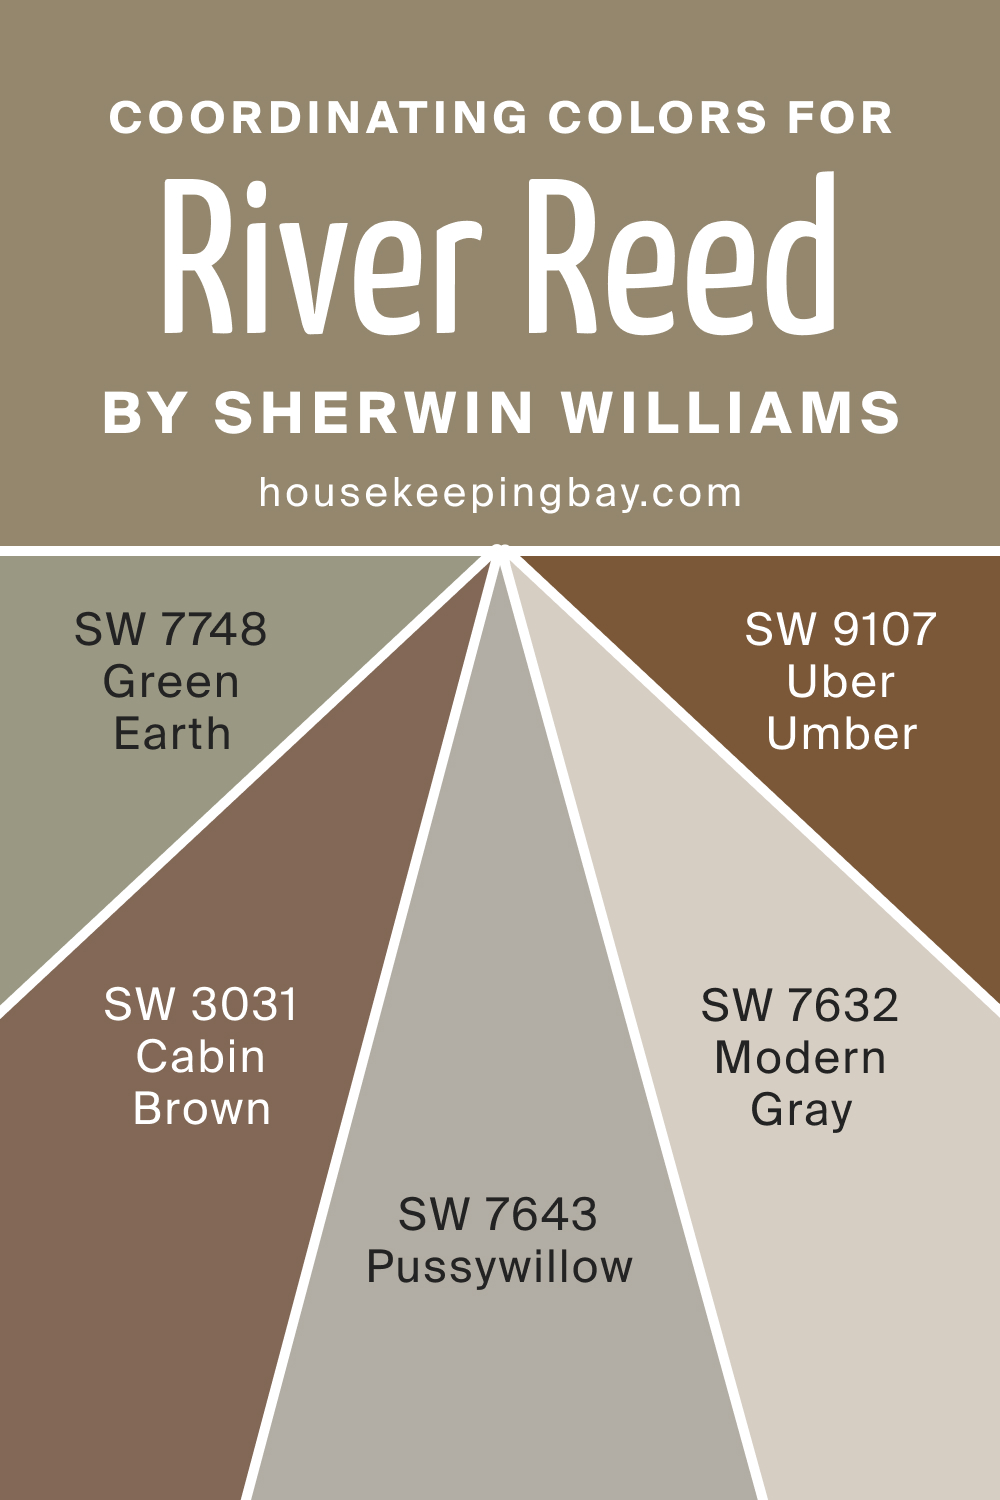 Coordinating Colors for SW 9534 River Reed by Sherwin Williams